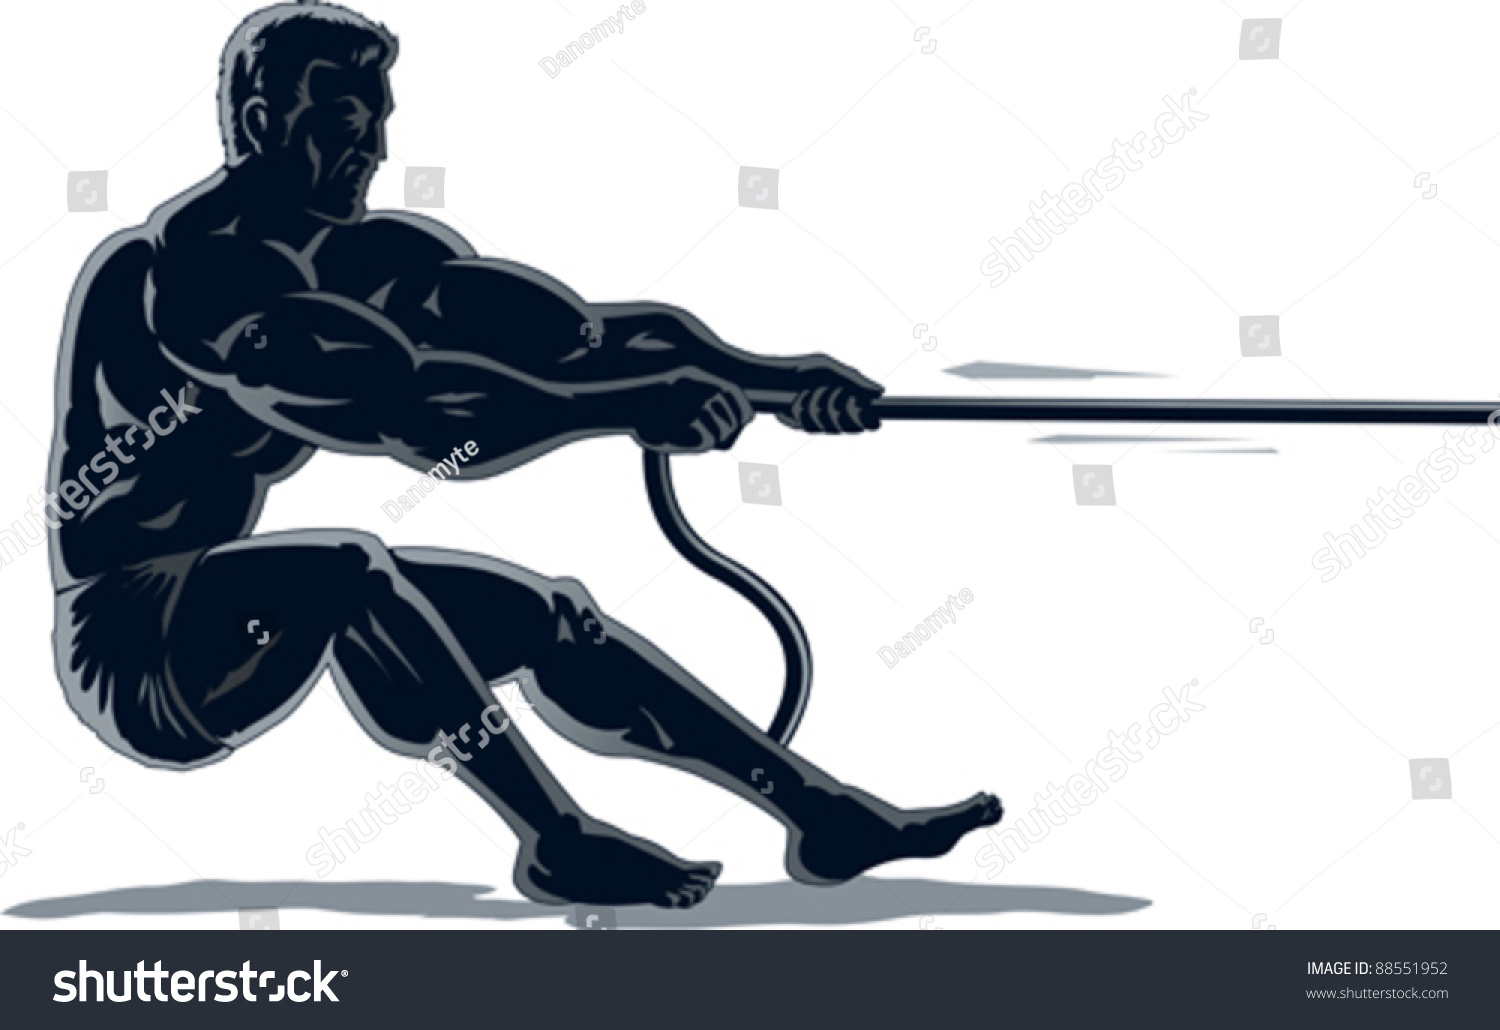 clipart man pulling rope - photo #10